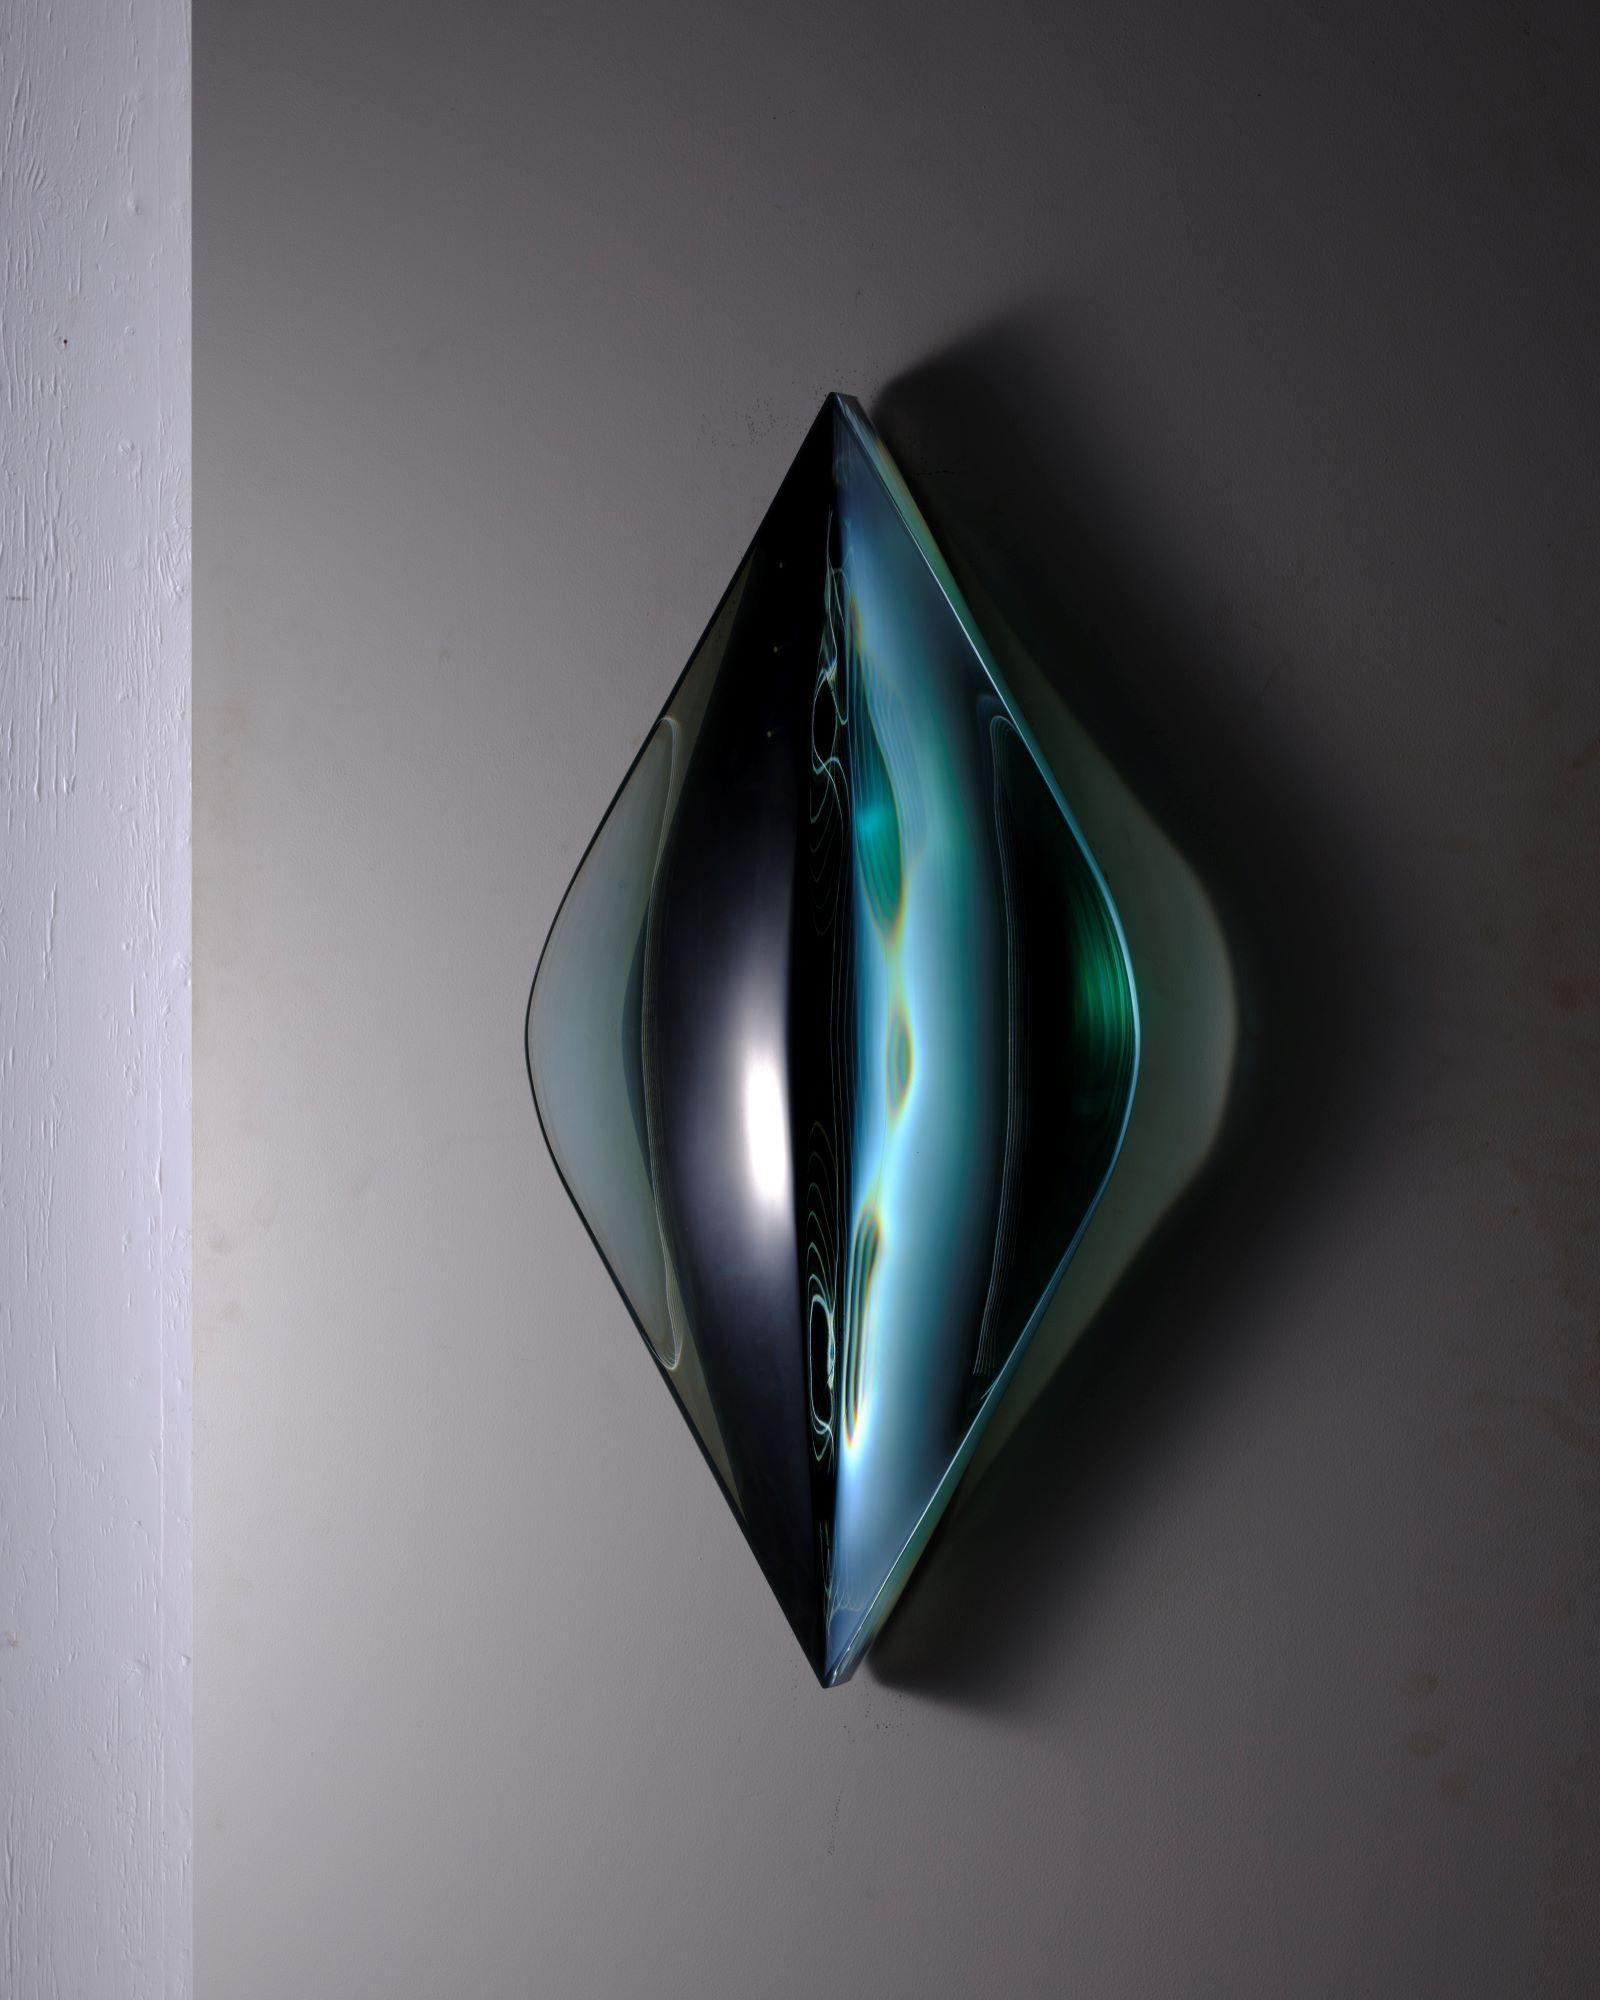 P.010502-II is a glass sculpture by Japanese contemporary artist Toshio Iezumi, dimensions are 75 × 38 × 9 cm (29.5 × 15 × 3.5 in). 
The sculpture is signed and numbered, it is part of a limited edition of 7 editions and comes with a certificate of